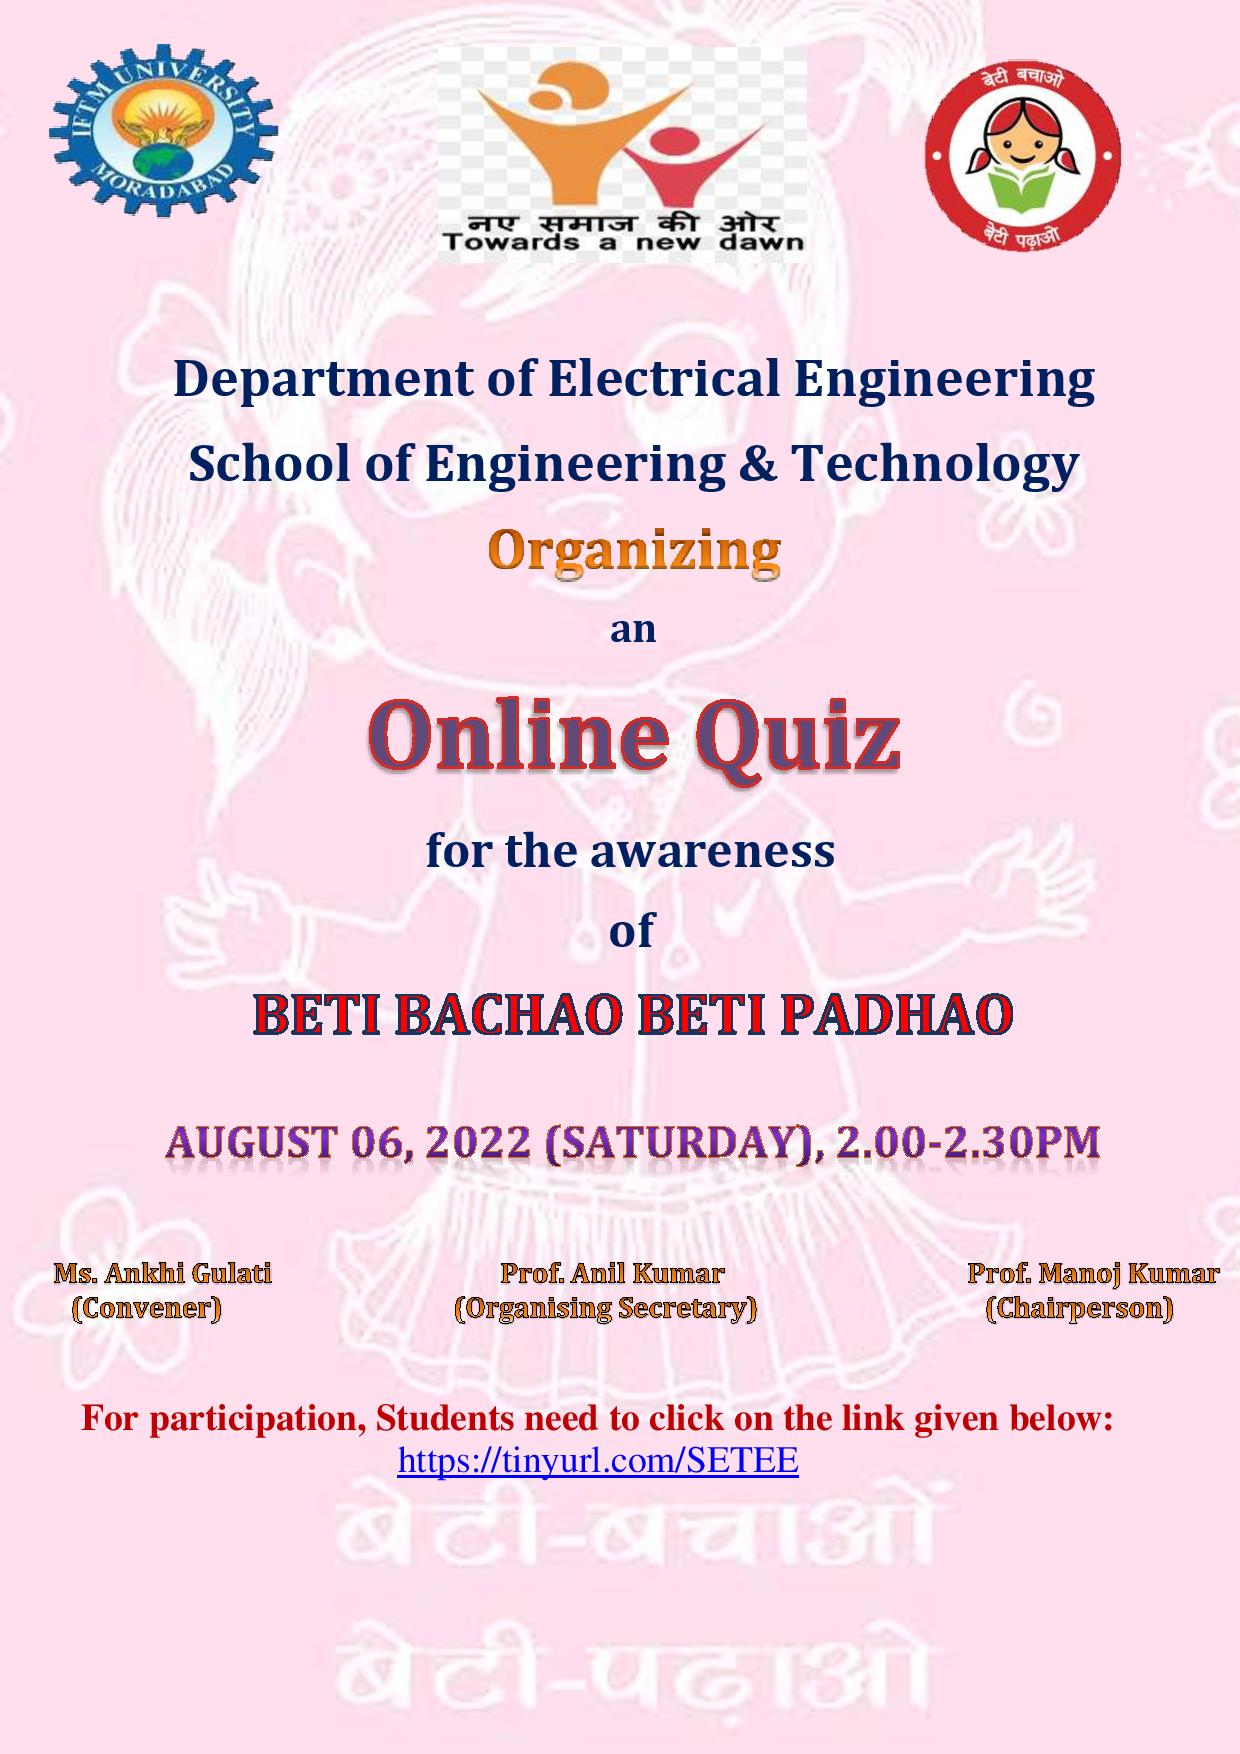 Online Quiz for the awareness of Beti Bachao Beti Padhao